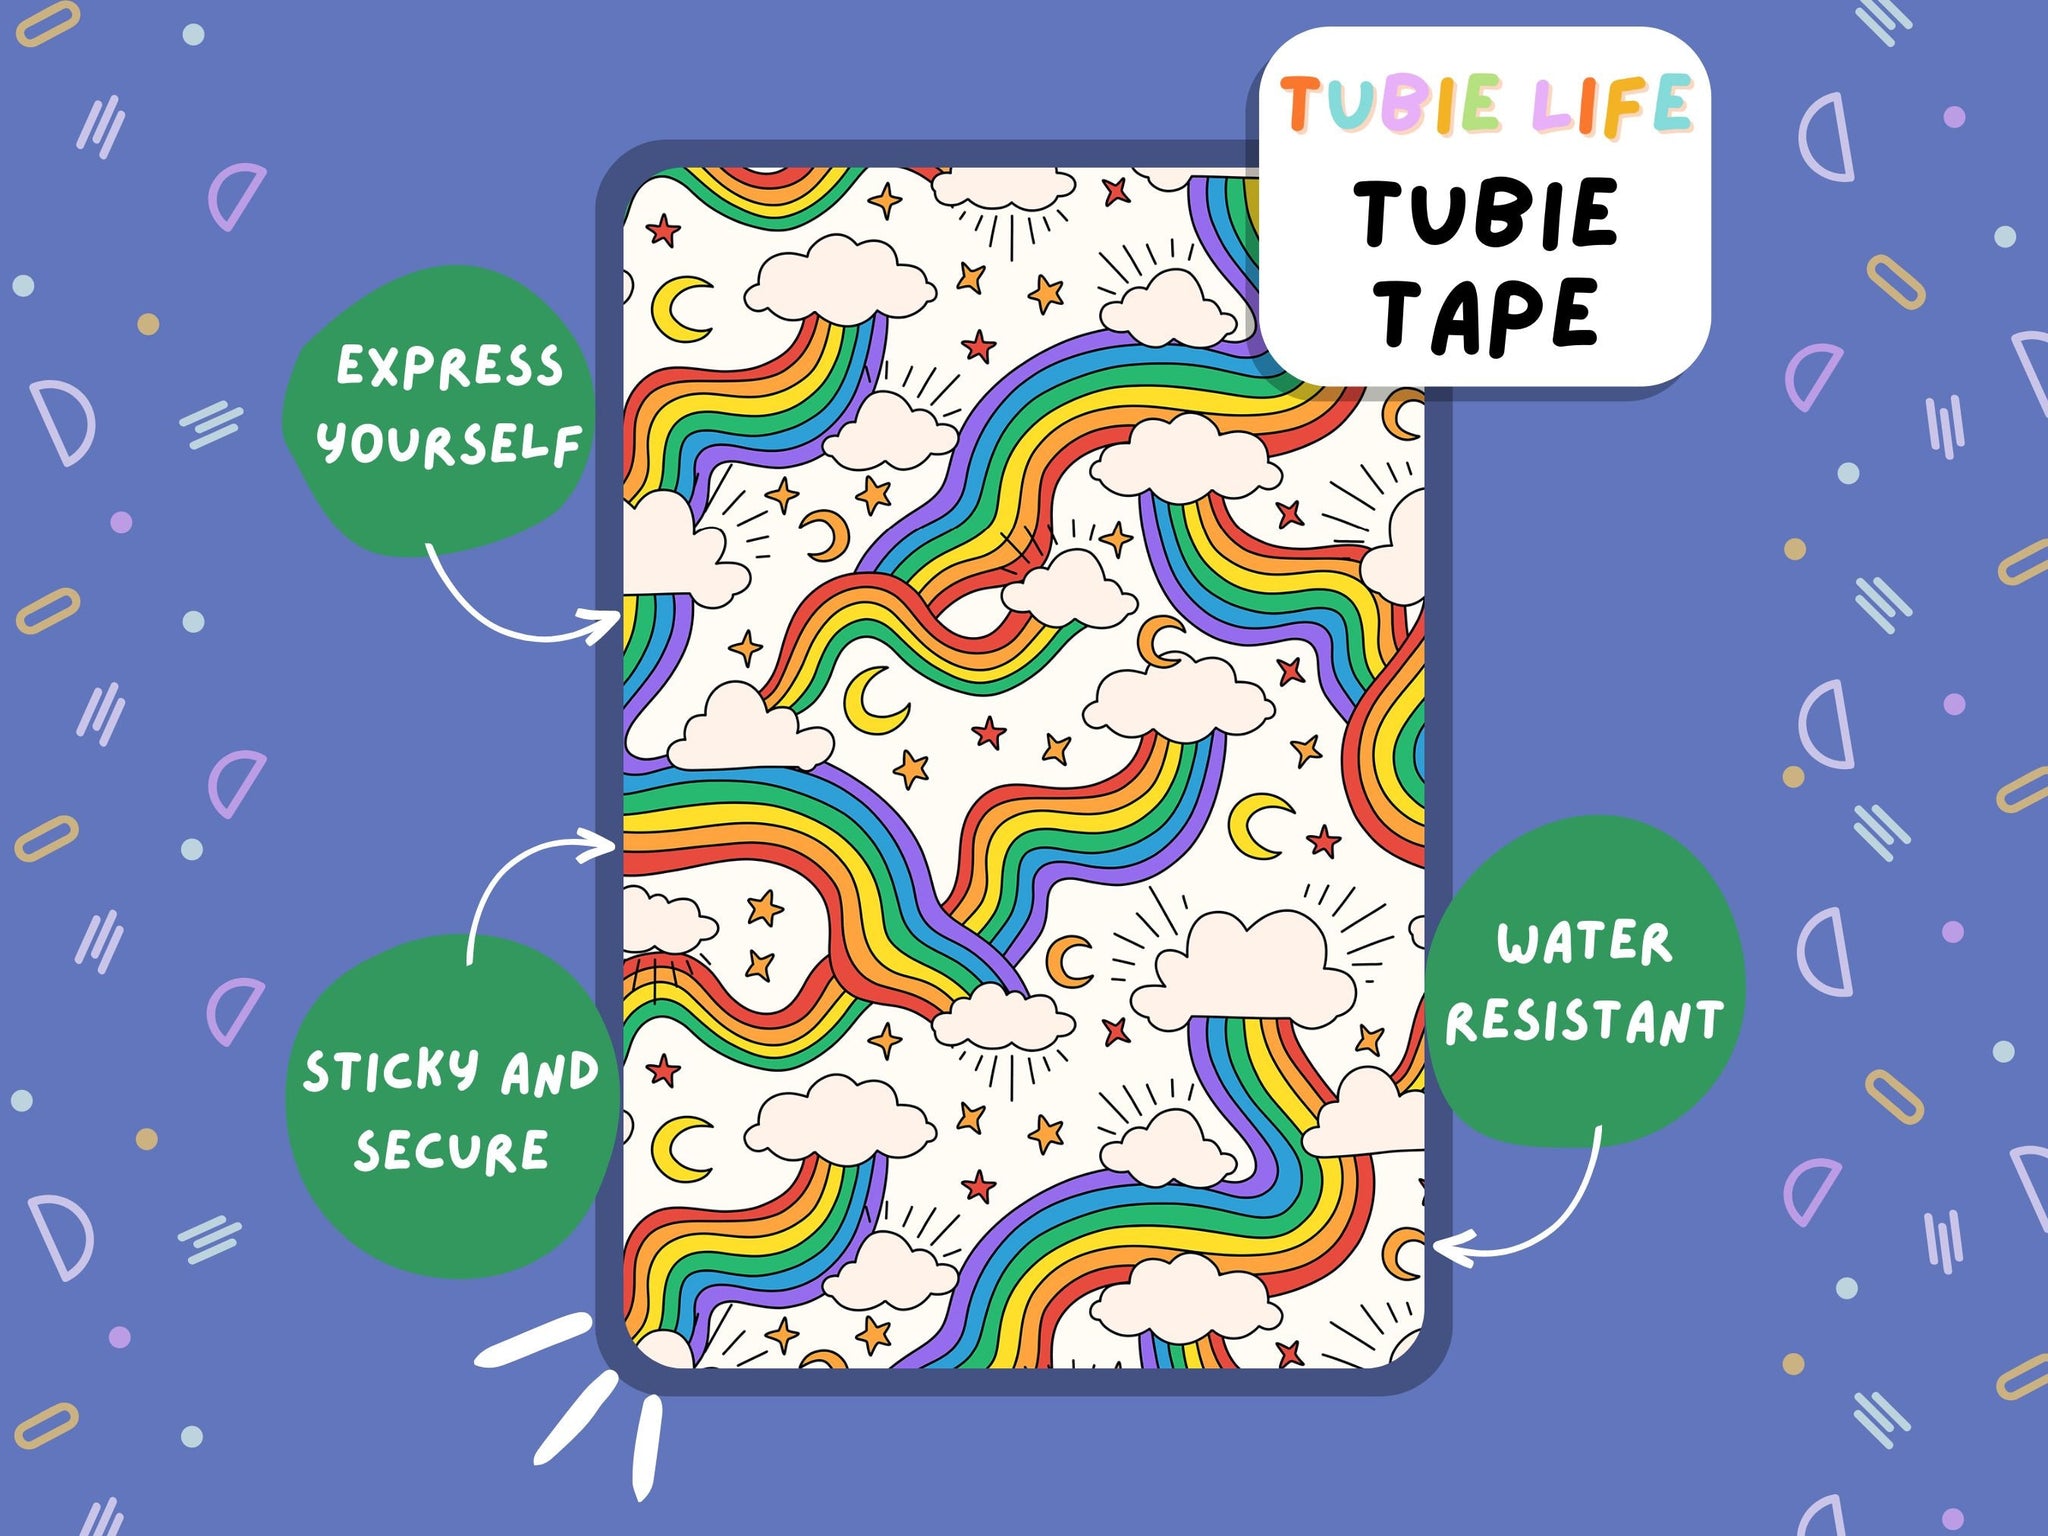 TUBIE TAPE Tubie Life rainbow clouds ng tube tape for feeding tubes and other tubing Full Sheet